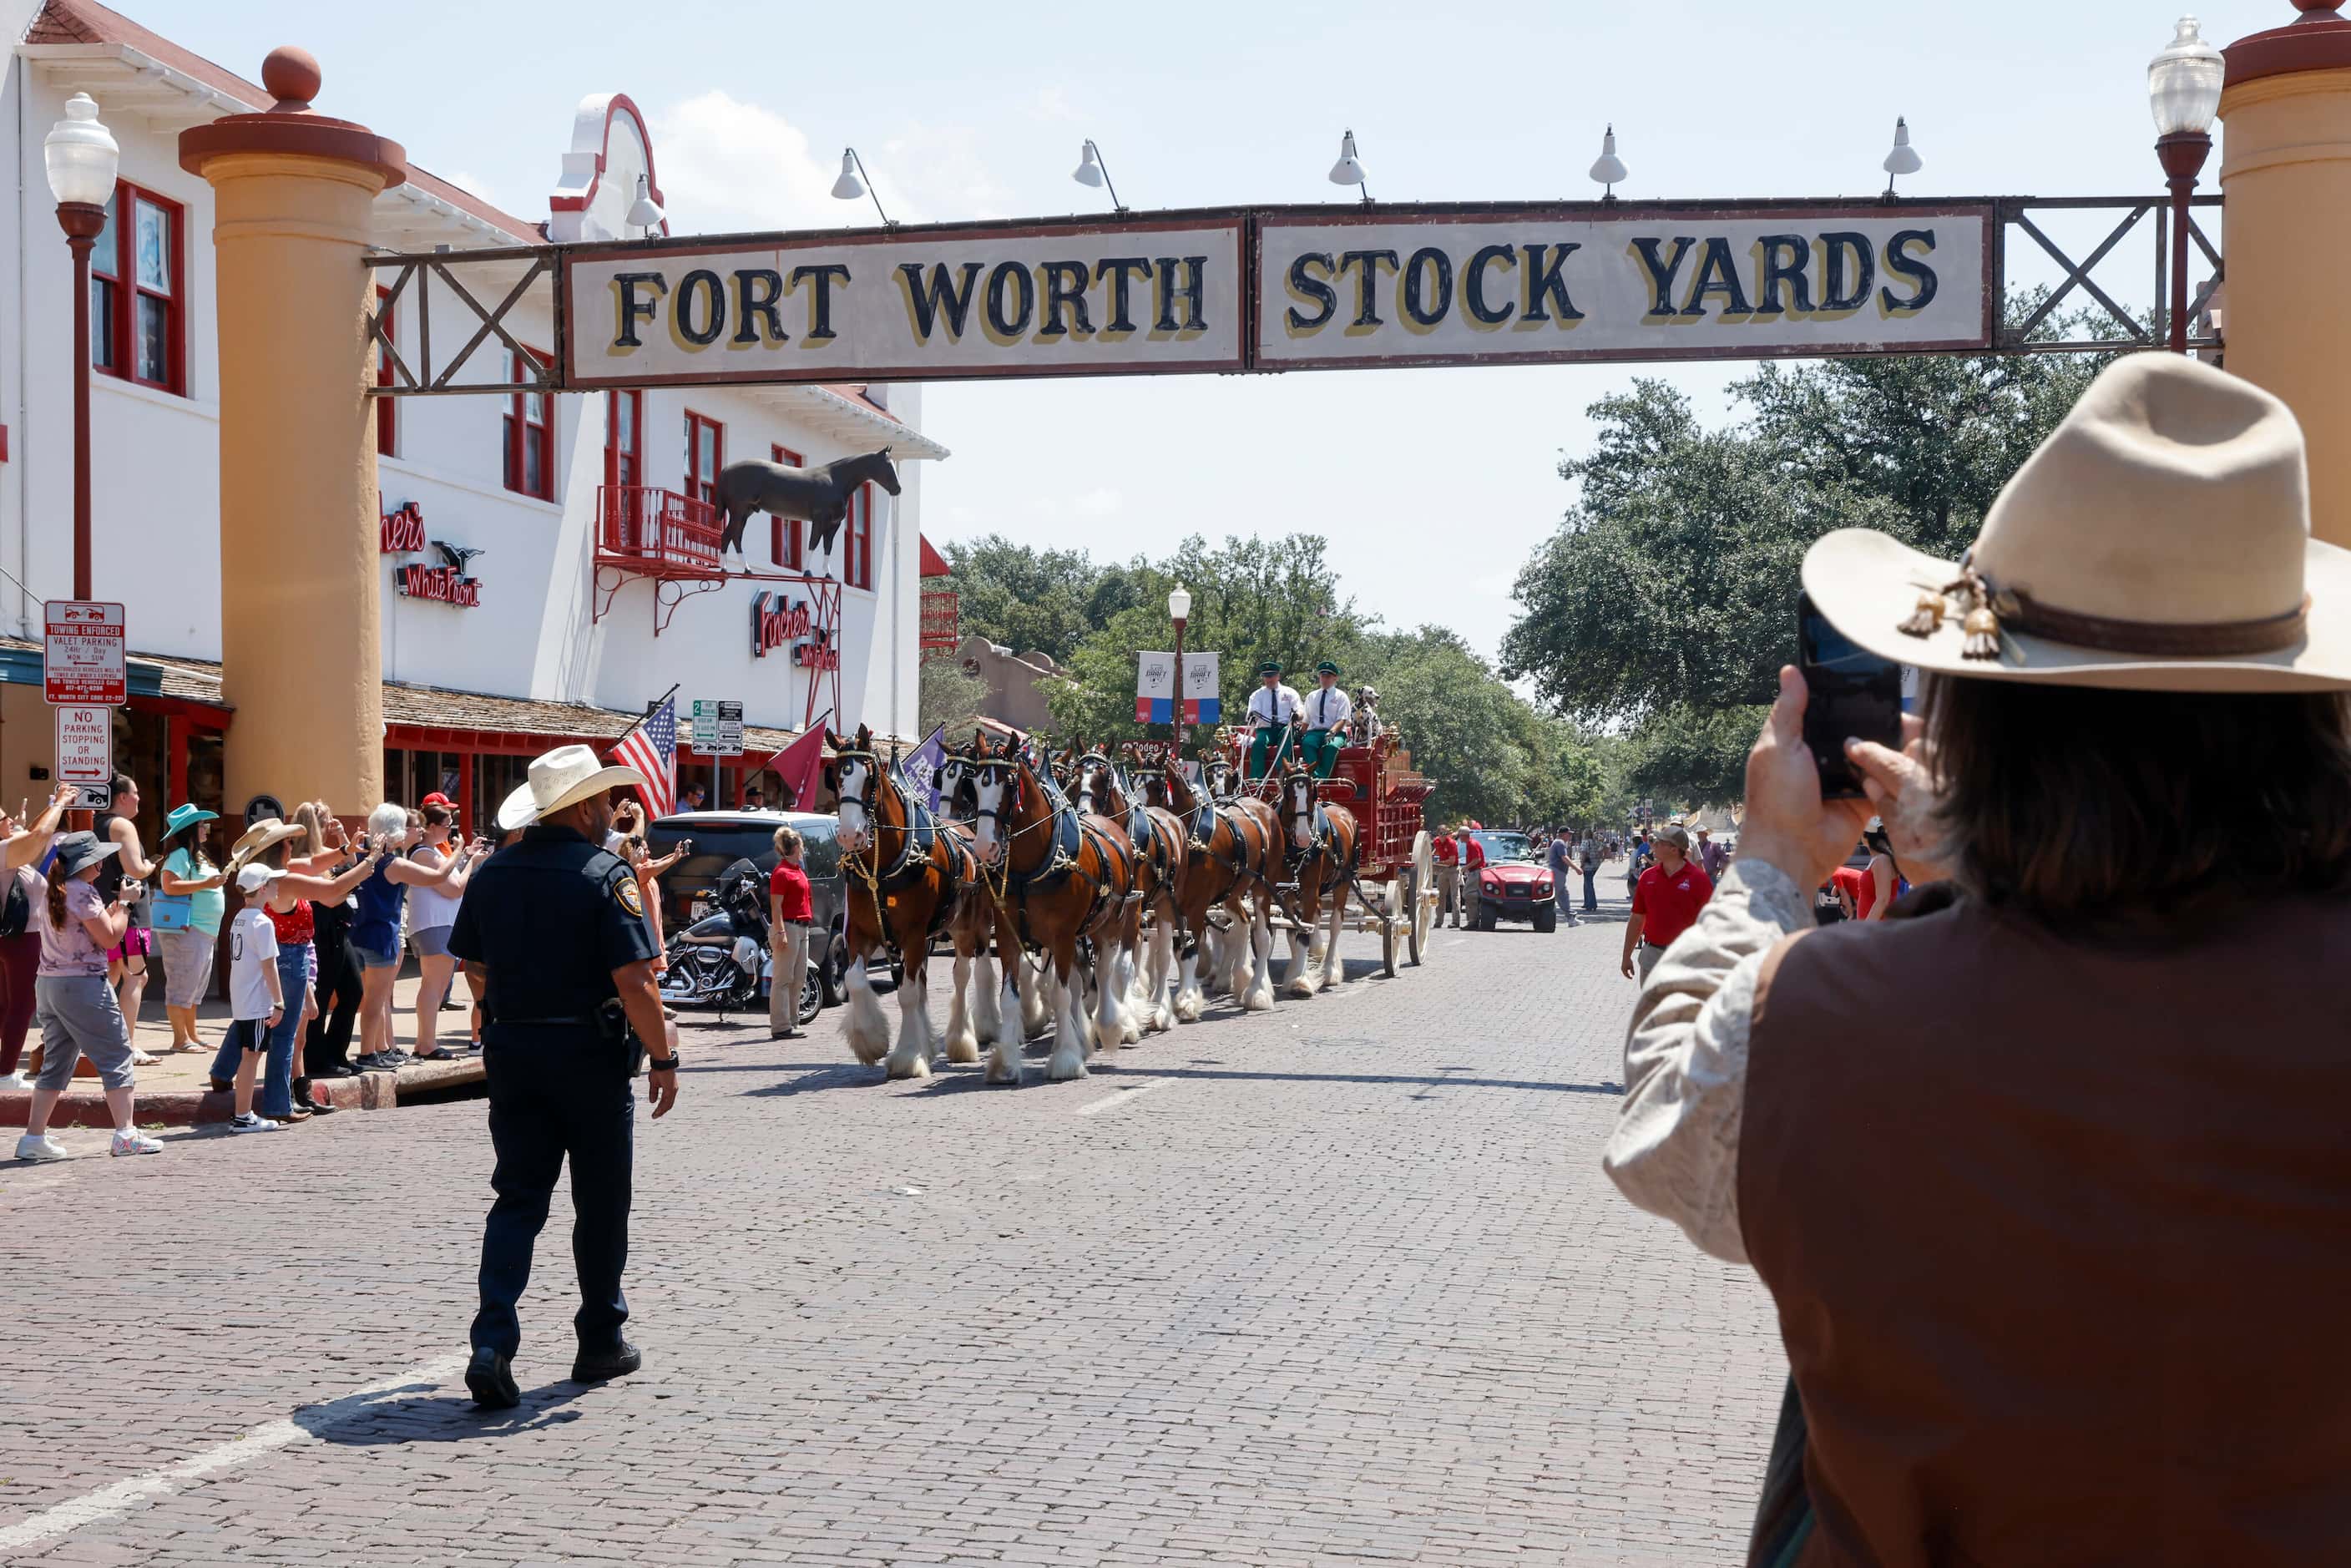 People take photos as the Budweiser Clydesdales pass under the Fort Worth Stockyards sign...